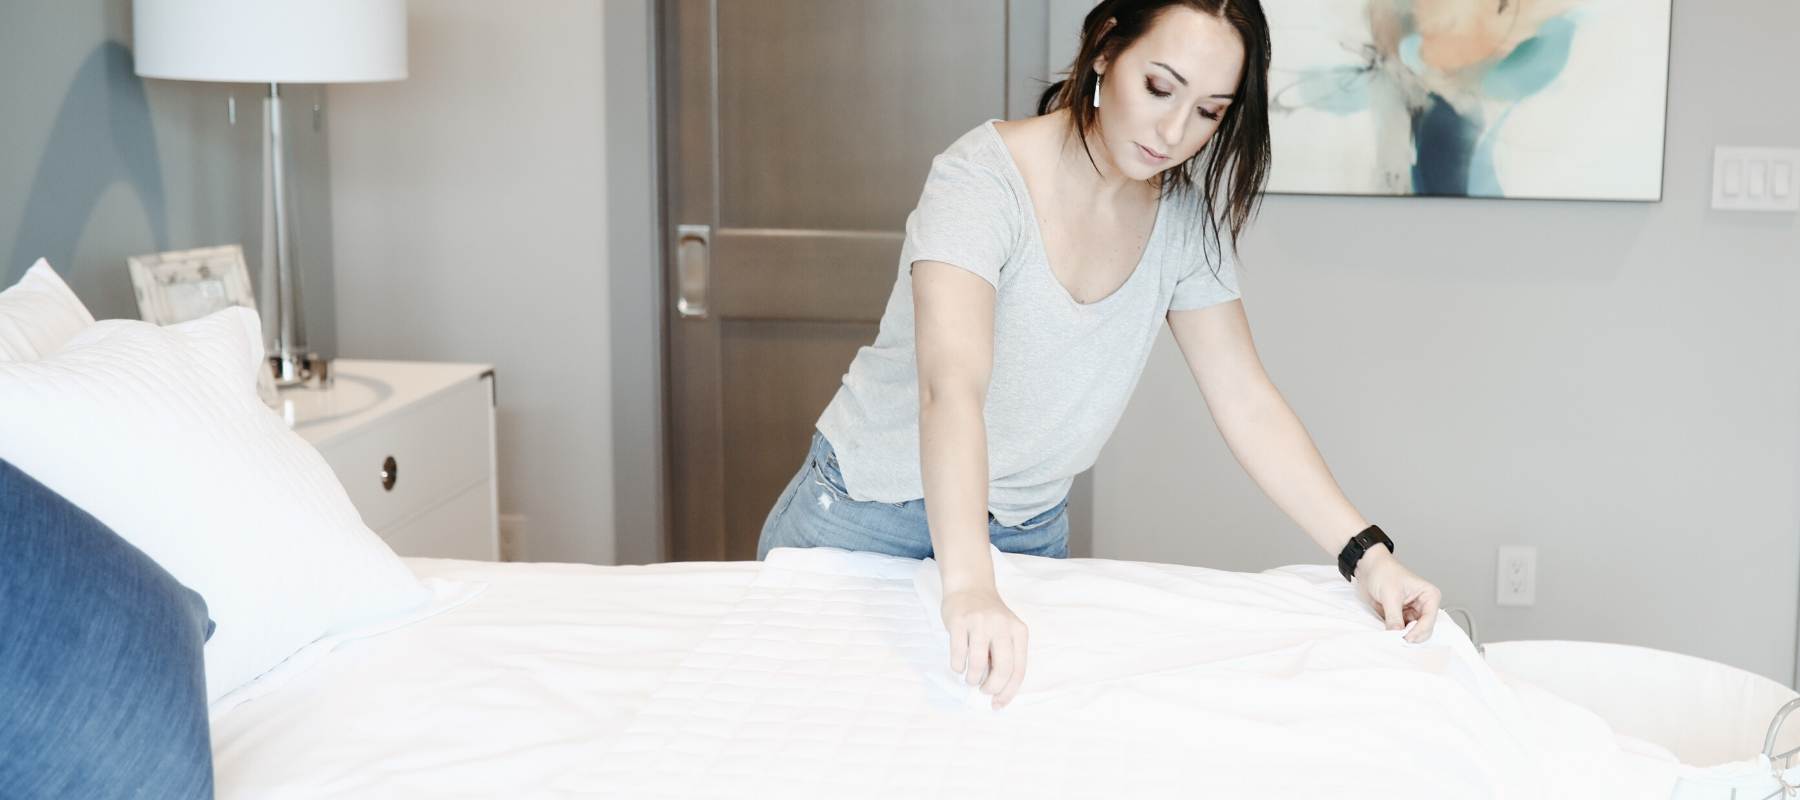 Women in t-shirt making the bed